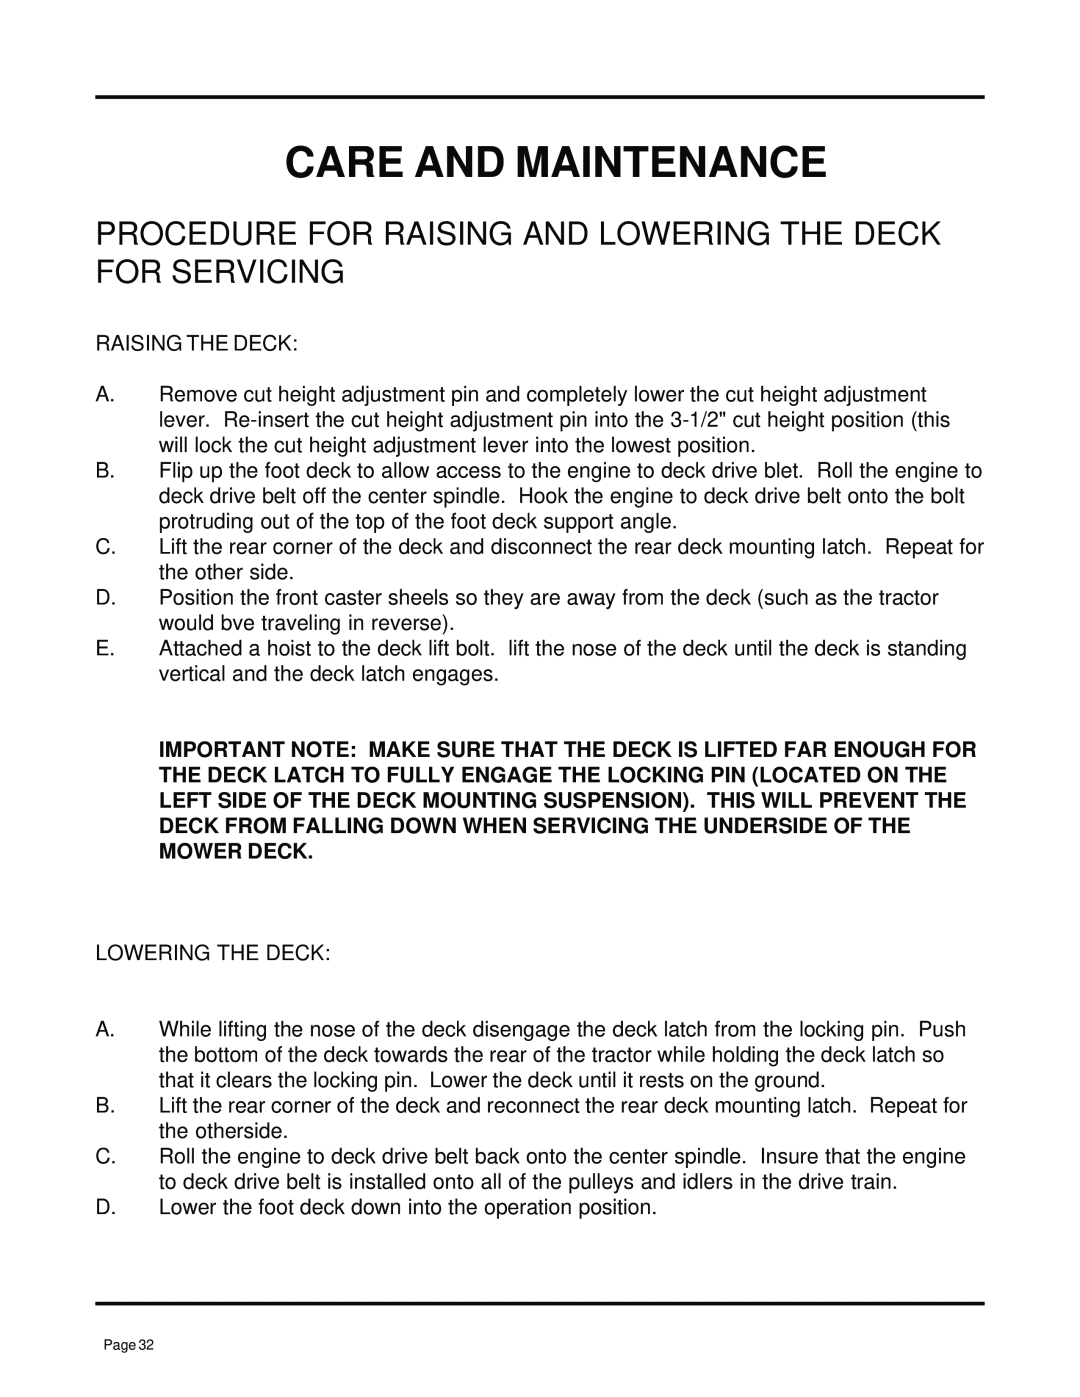 Dixon ZTR 7025, 13091-0500 manual Care And Maintenance, Procedure For Raising And Lowering The Deck For Servicing 